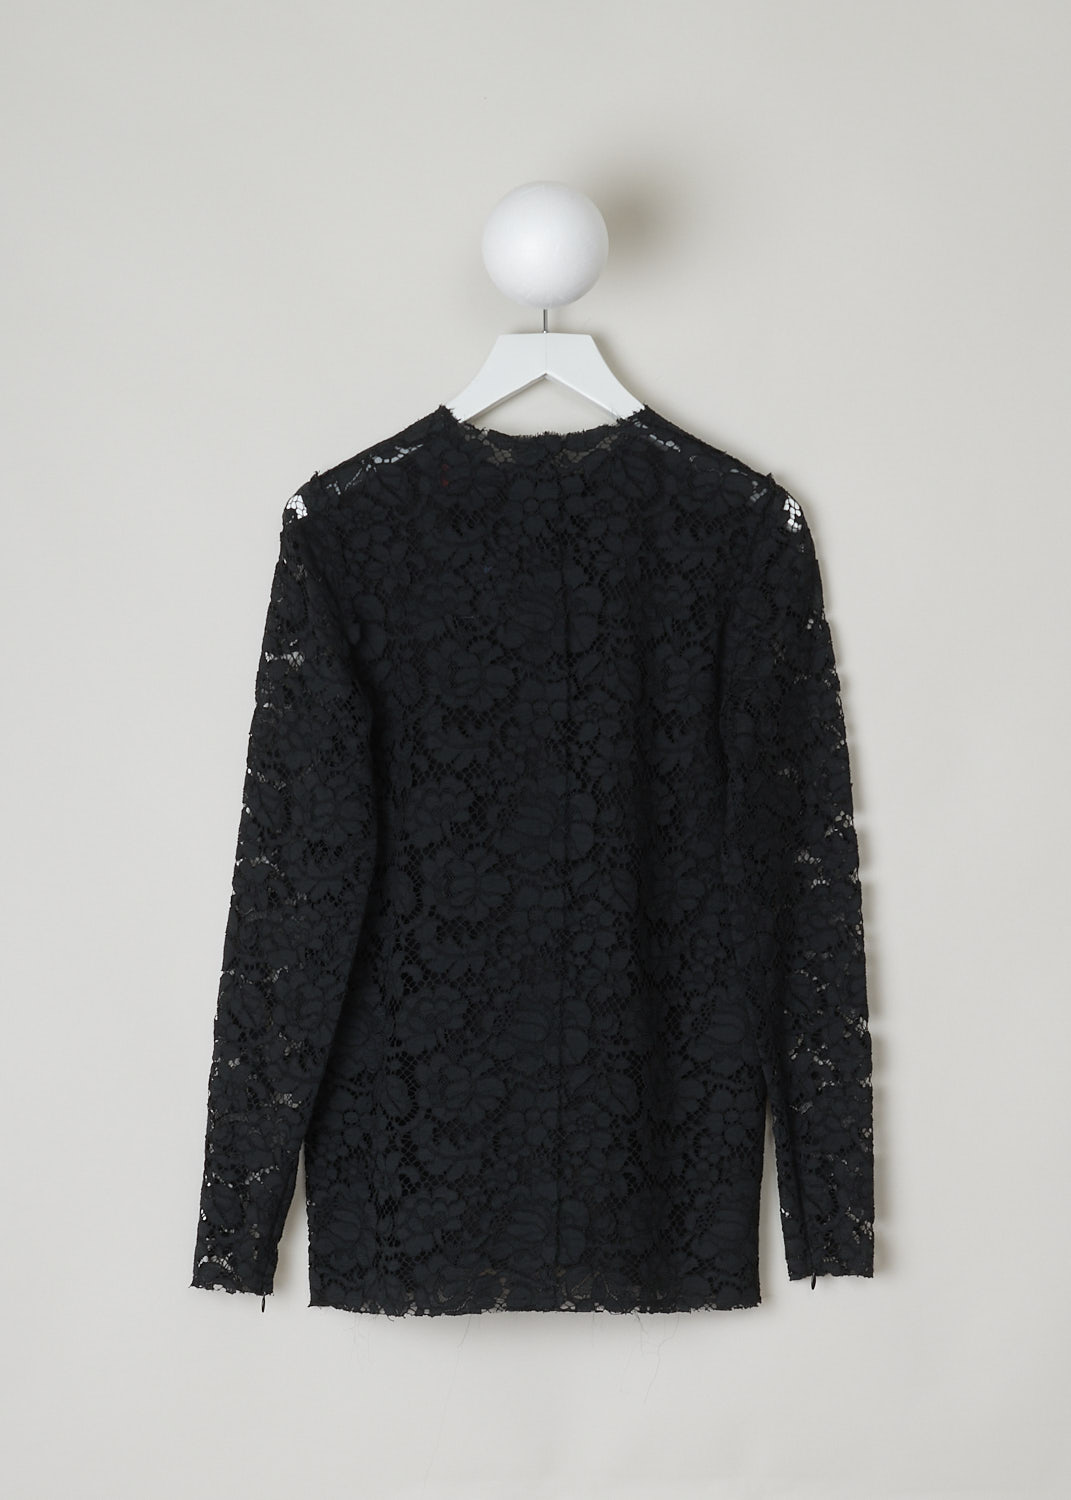 LANVIN, BLACK LACE TOP, W060771468C5B_NOIR, Black, Back, This black lace top with black silk lining has a round neckline with a raw finish. In the back of the neck, a concealed snap button functions as the closure option.  The long sleeves have zipped cuffs. The straight hemline also has a raw finish.
